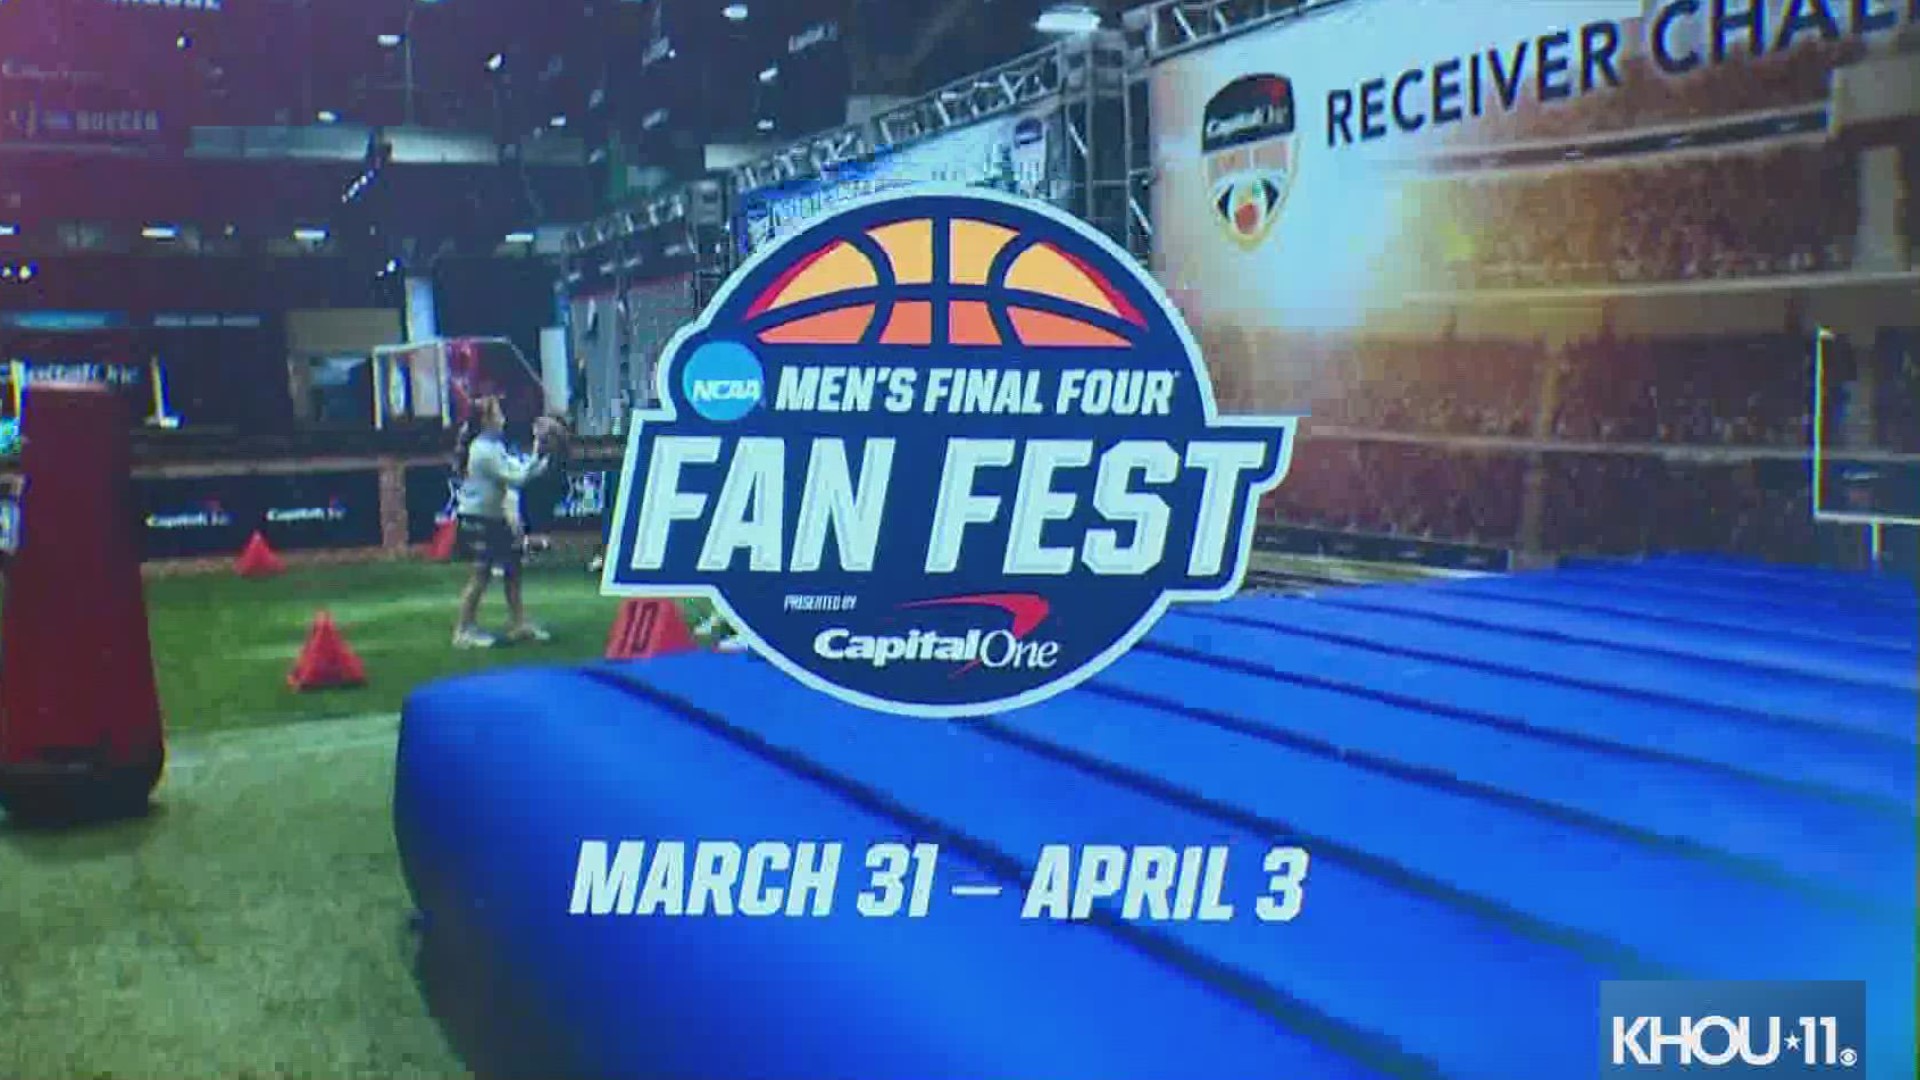 The NCAA and the local organizing committee unveiled the Men’s Final Four ancillary events coming to Houston in March.